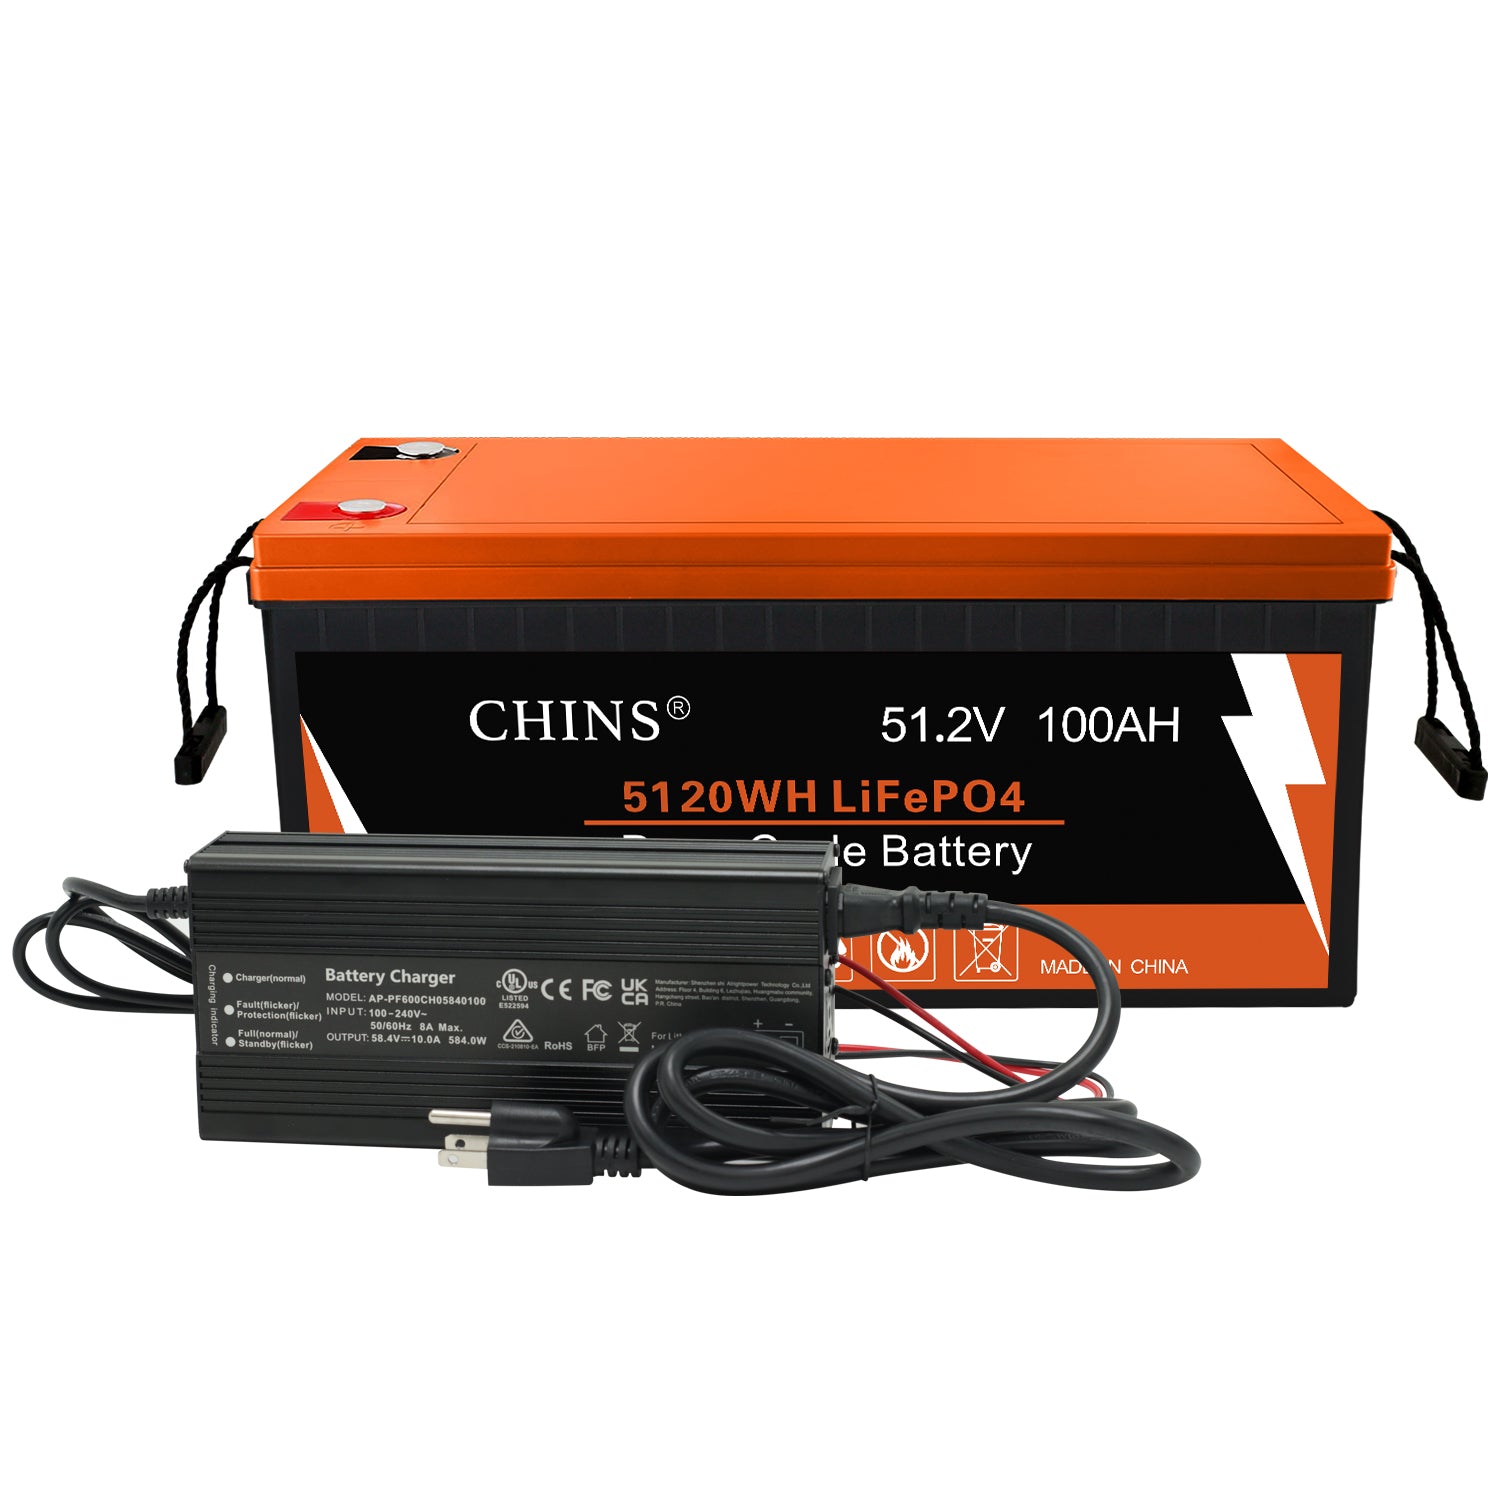 CHINS 100AH Smart 48V LiFePO4 Lithium Bluetooth Battery w/ Built-in 100A BMS